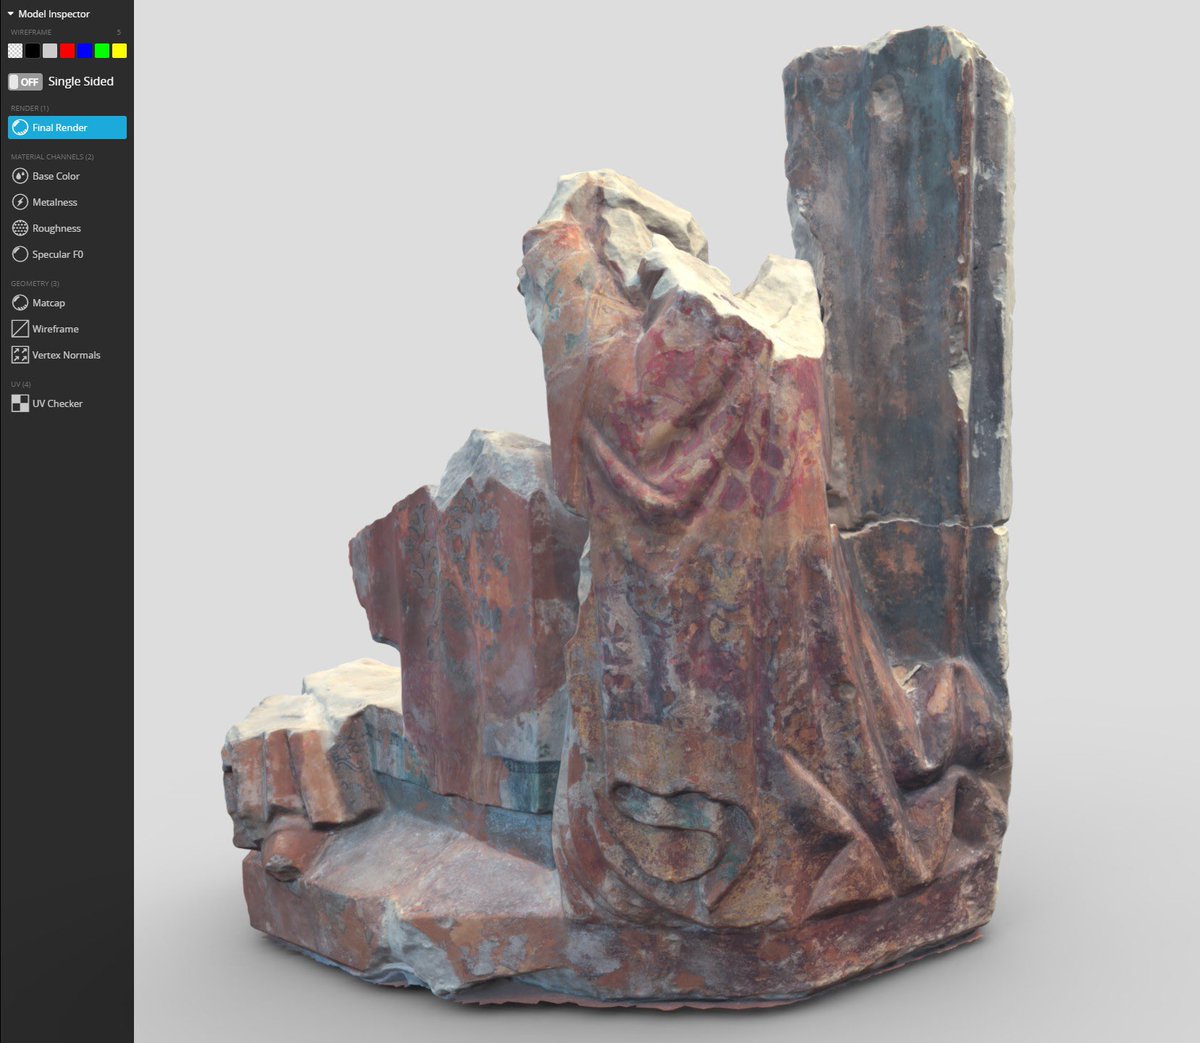 Martin Smith and Adam Redford (Computer Animation) have been rendering broken fragments of a unique carving of the Mass of St Gregory via photogrammetry to reassemble the statue in virtual space!